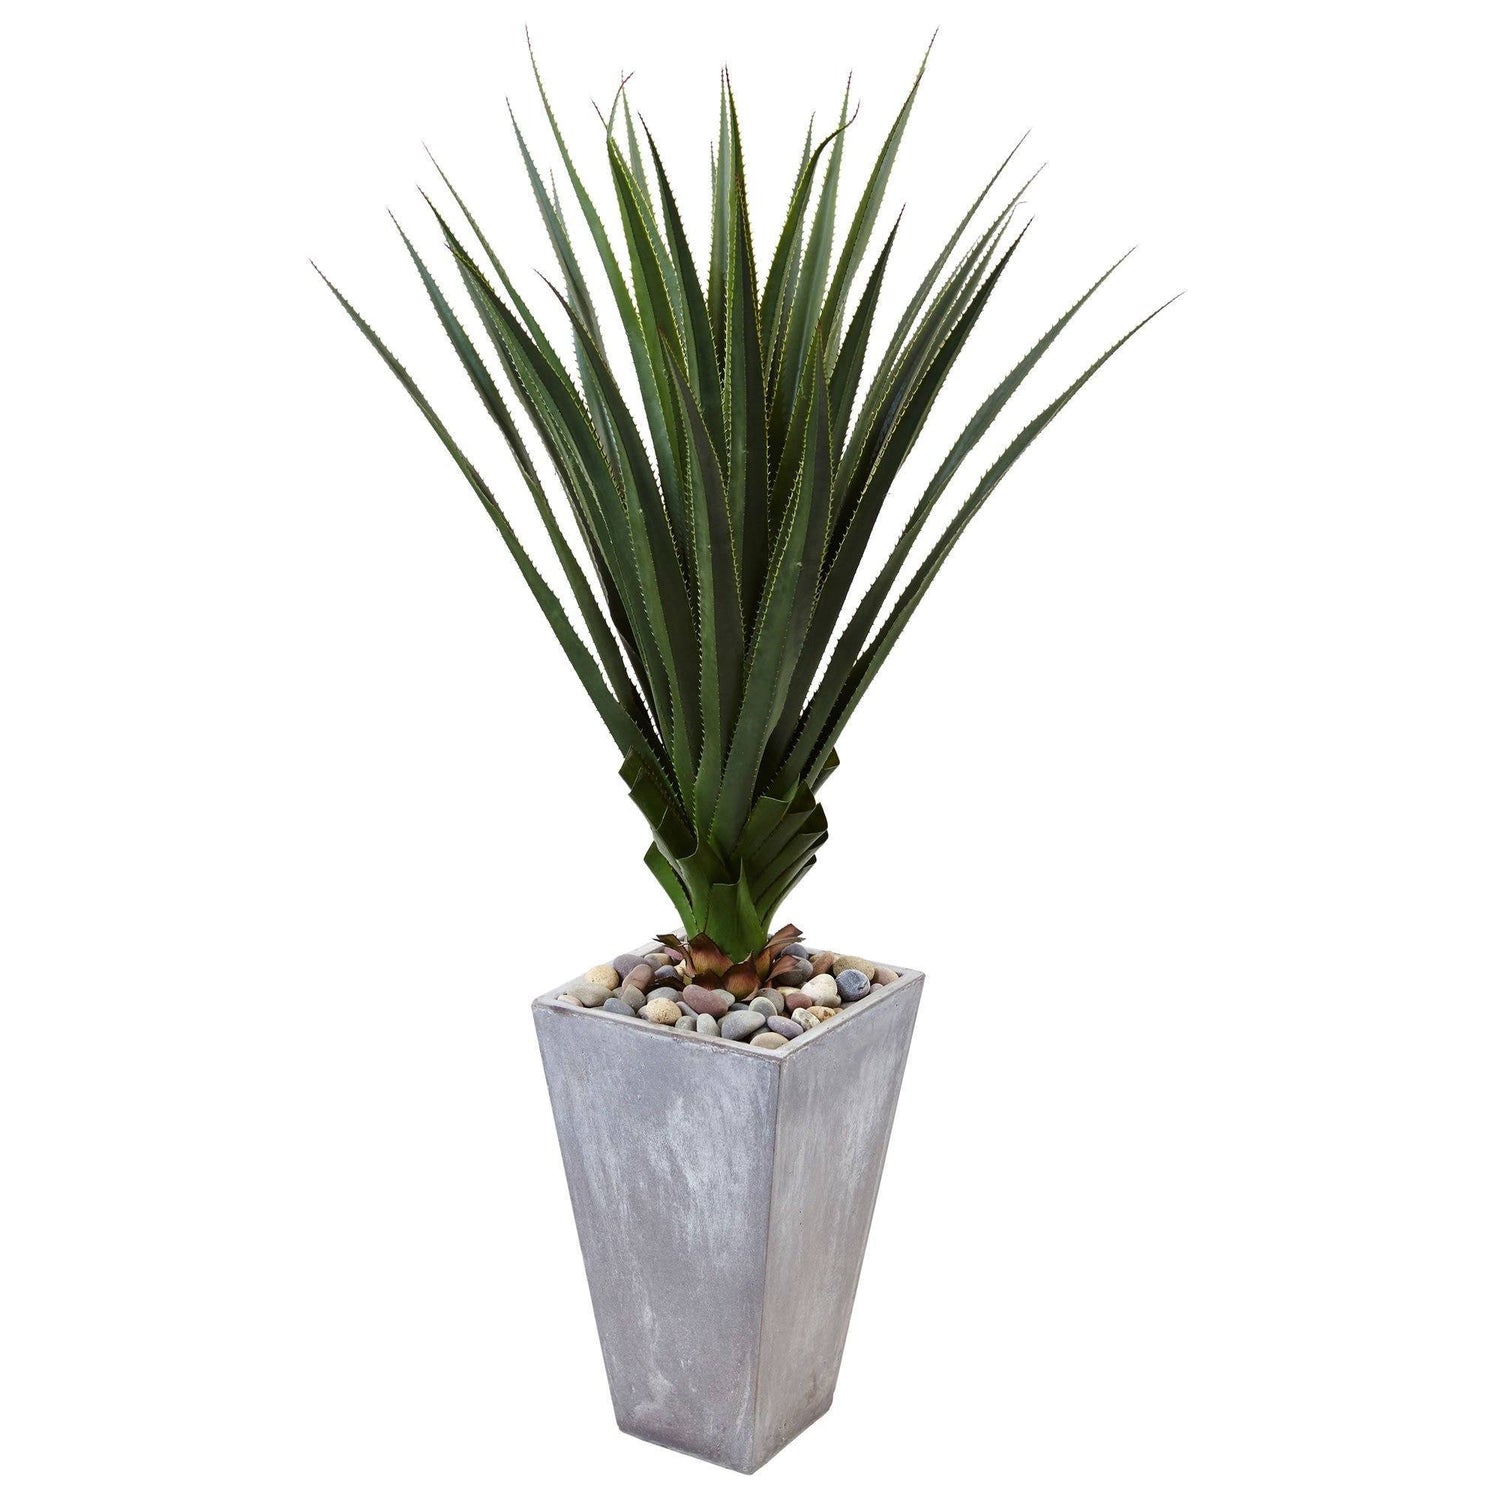 Spiked Agave in Cement Planter (Indoor/Outdoor)